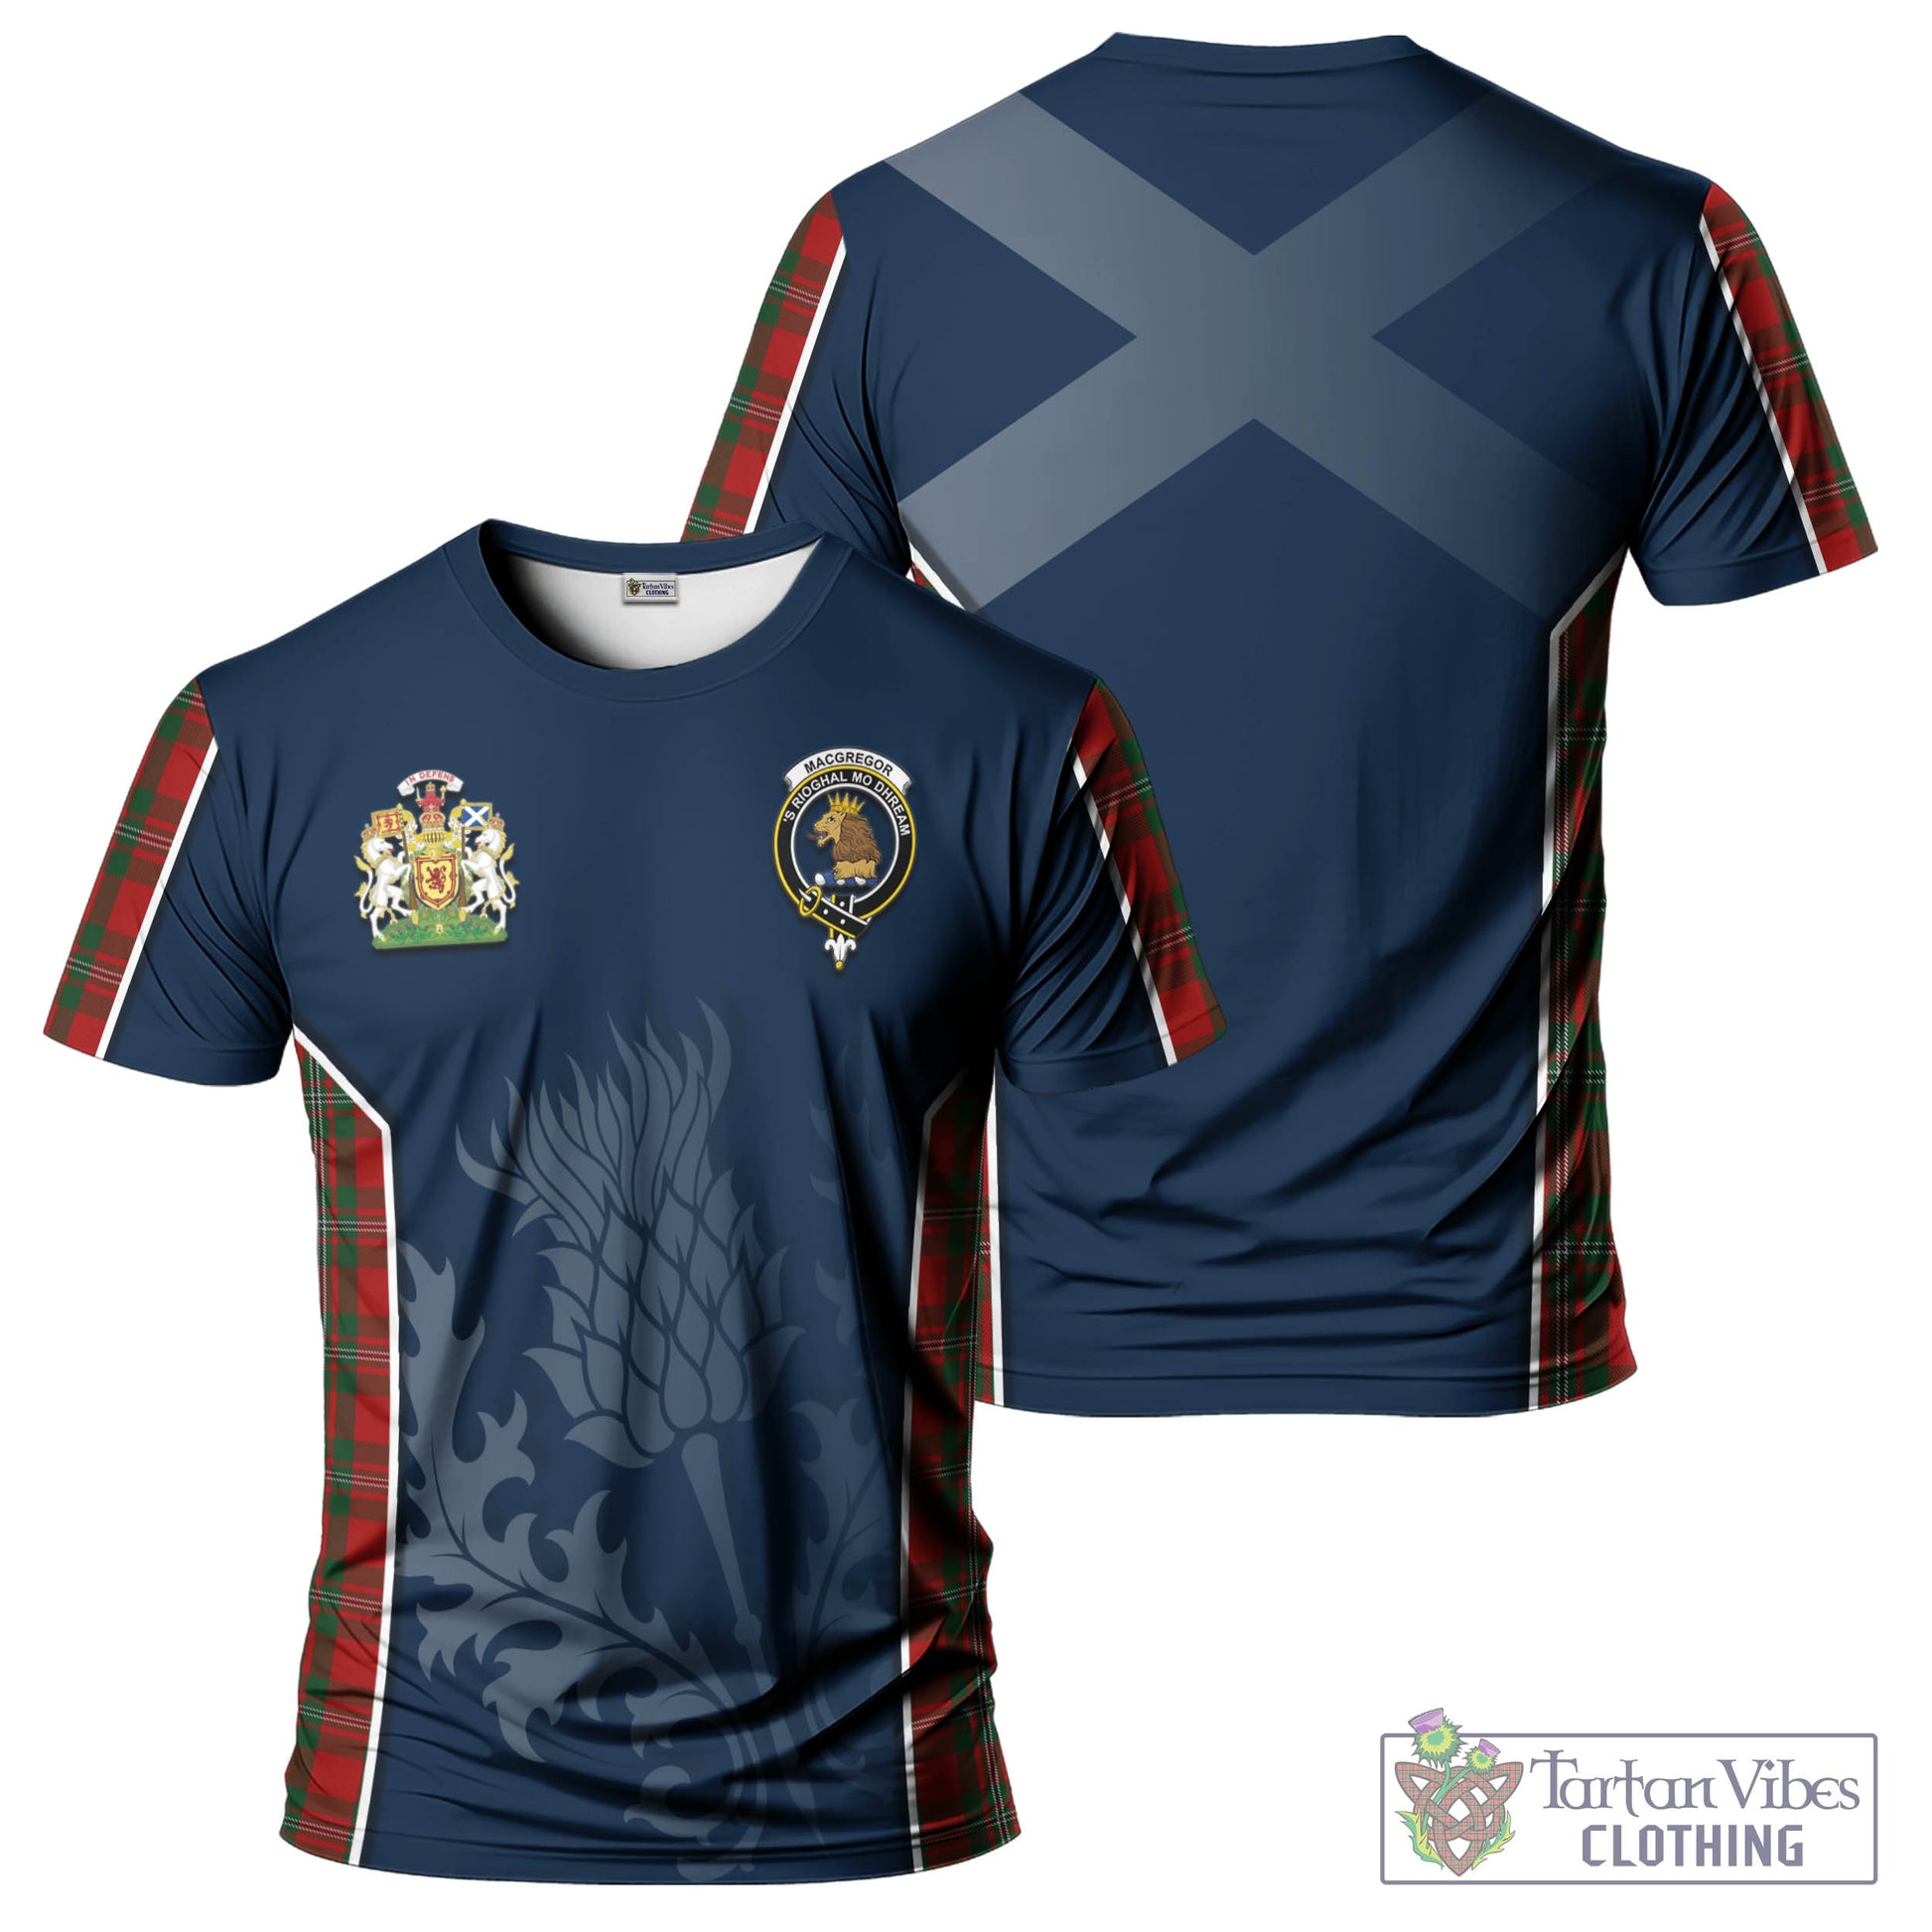 Tartan Vibes Clothing MacGregor Tartan T-Shirt with Family Crest and Scottish Thistle Vibes Sport Style